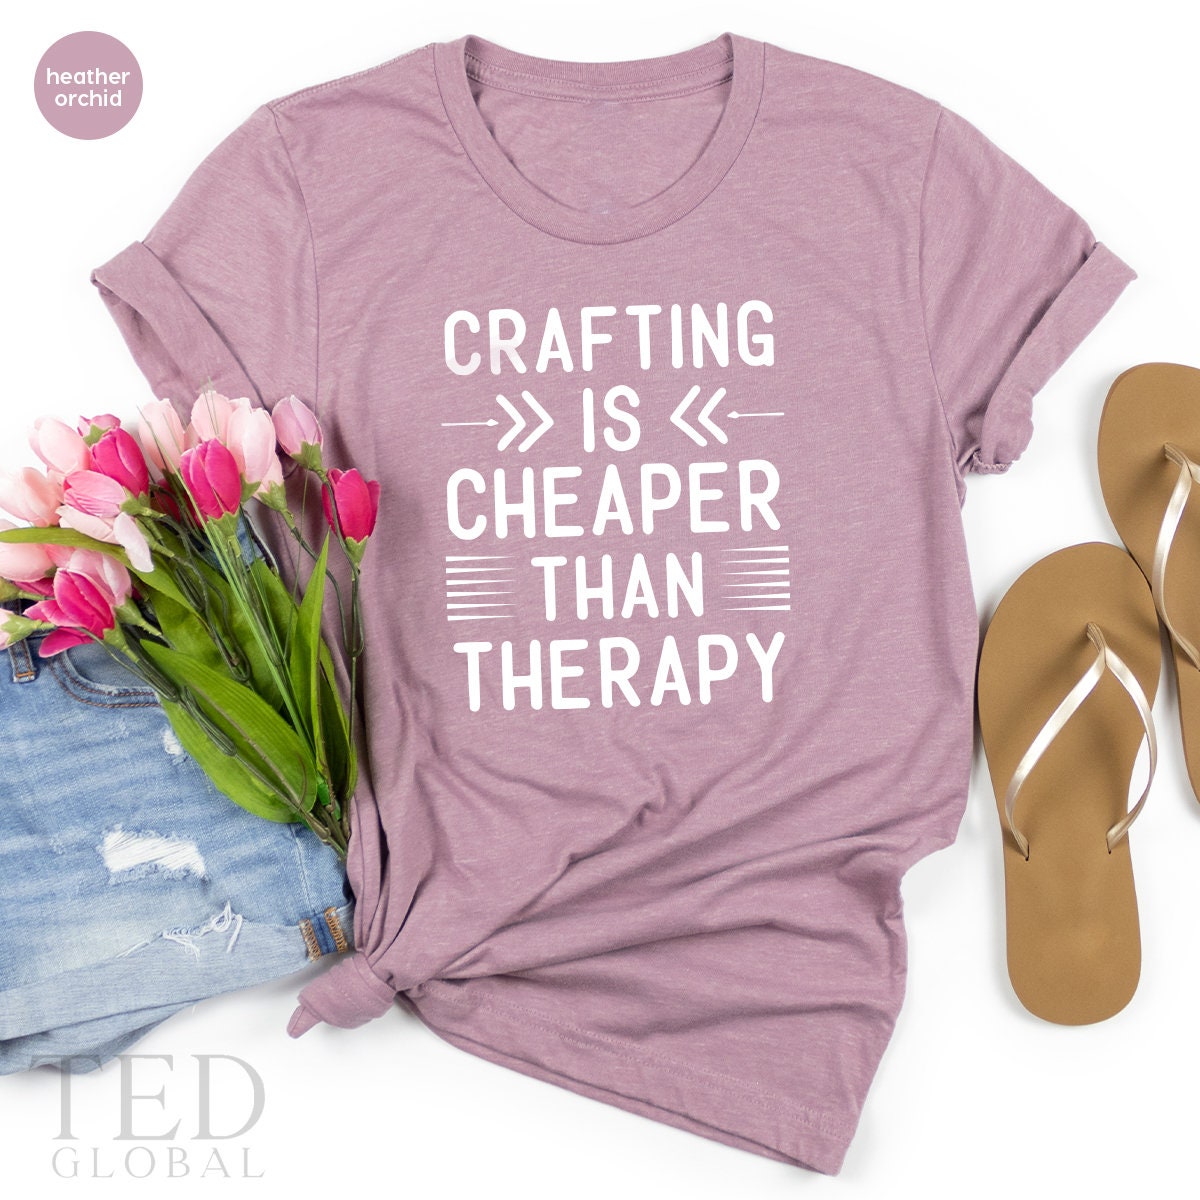 Crafting T-Shirt, Funny Craft TShirt, Cute Hobby T Shirt, Shirt For Crafter, Gift For Artist, Art Teacher Tees, Creating Graphic Tees - Fastdeliverytees.com